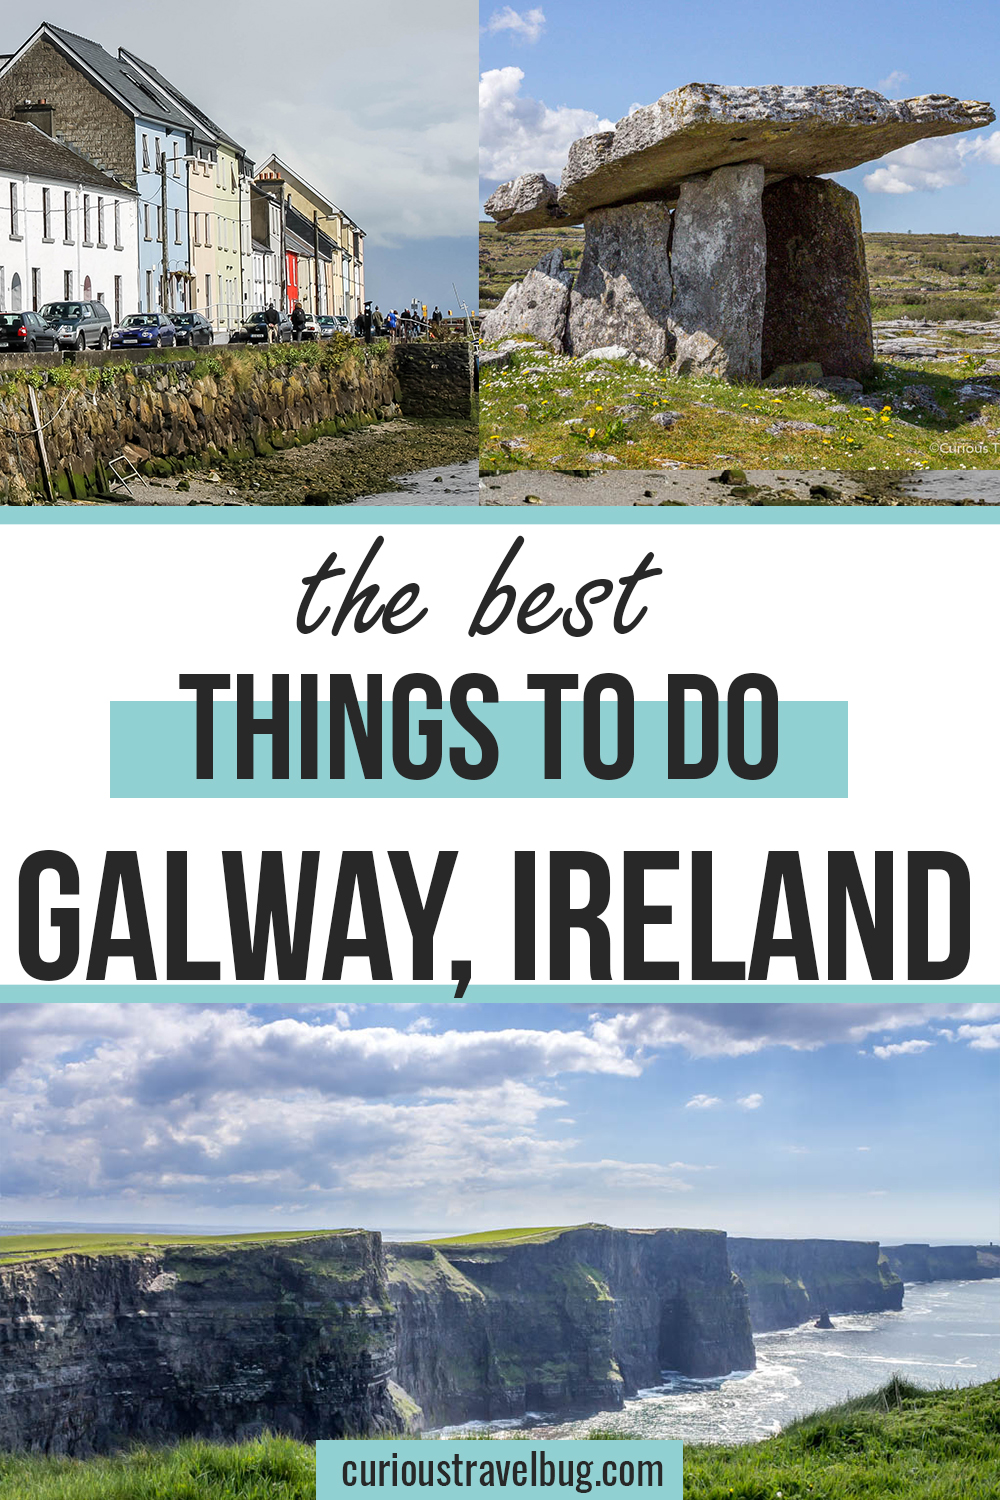 The best things to do in Galway, Ireland. Galway is the perfect city to visit in Ireland if you are looking for delicious food and staying on the Wild Atlantic way. There are great day trips from Galway including the Cliffs of Moher and Connemara and Cong and the Burren. This is one of Ireland's top destinations and is the perfect itinerary for 3 days in Galway, Ireland.